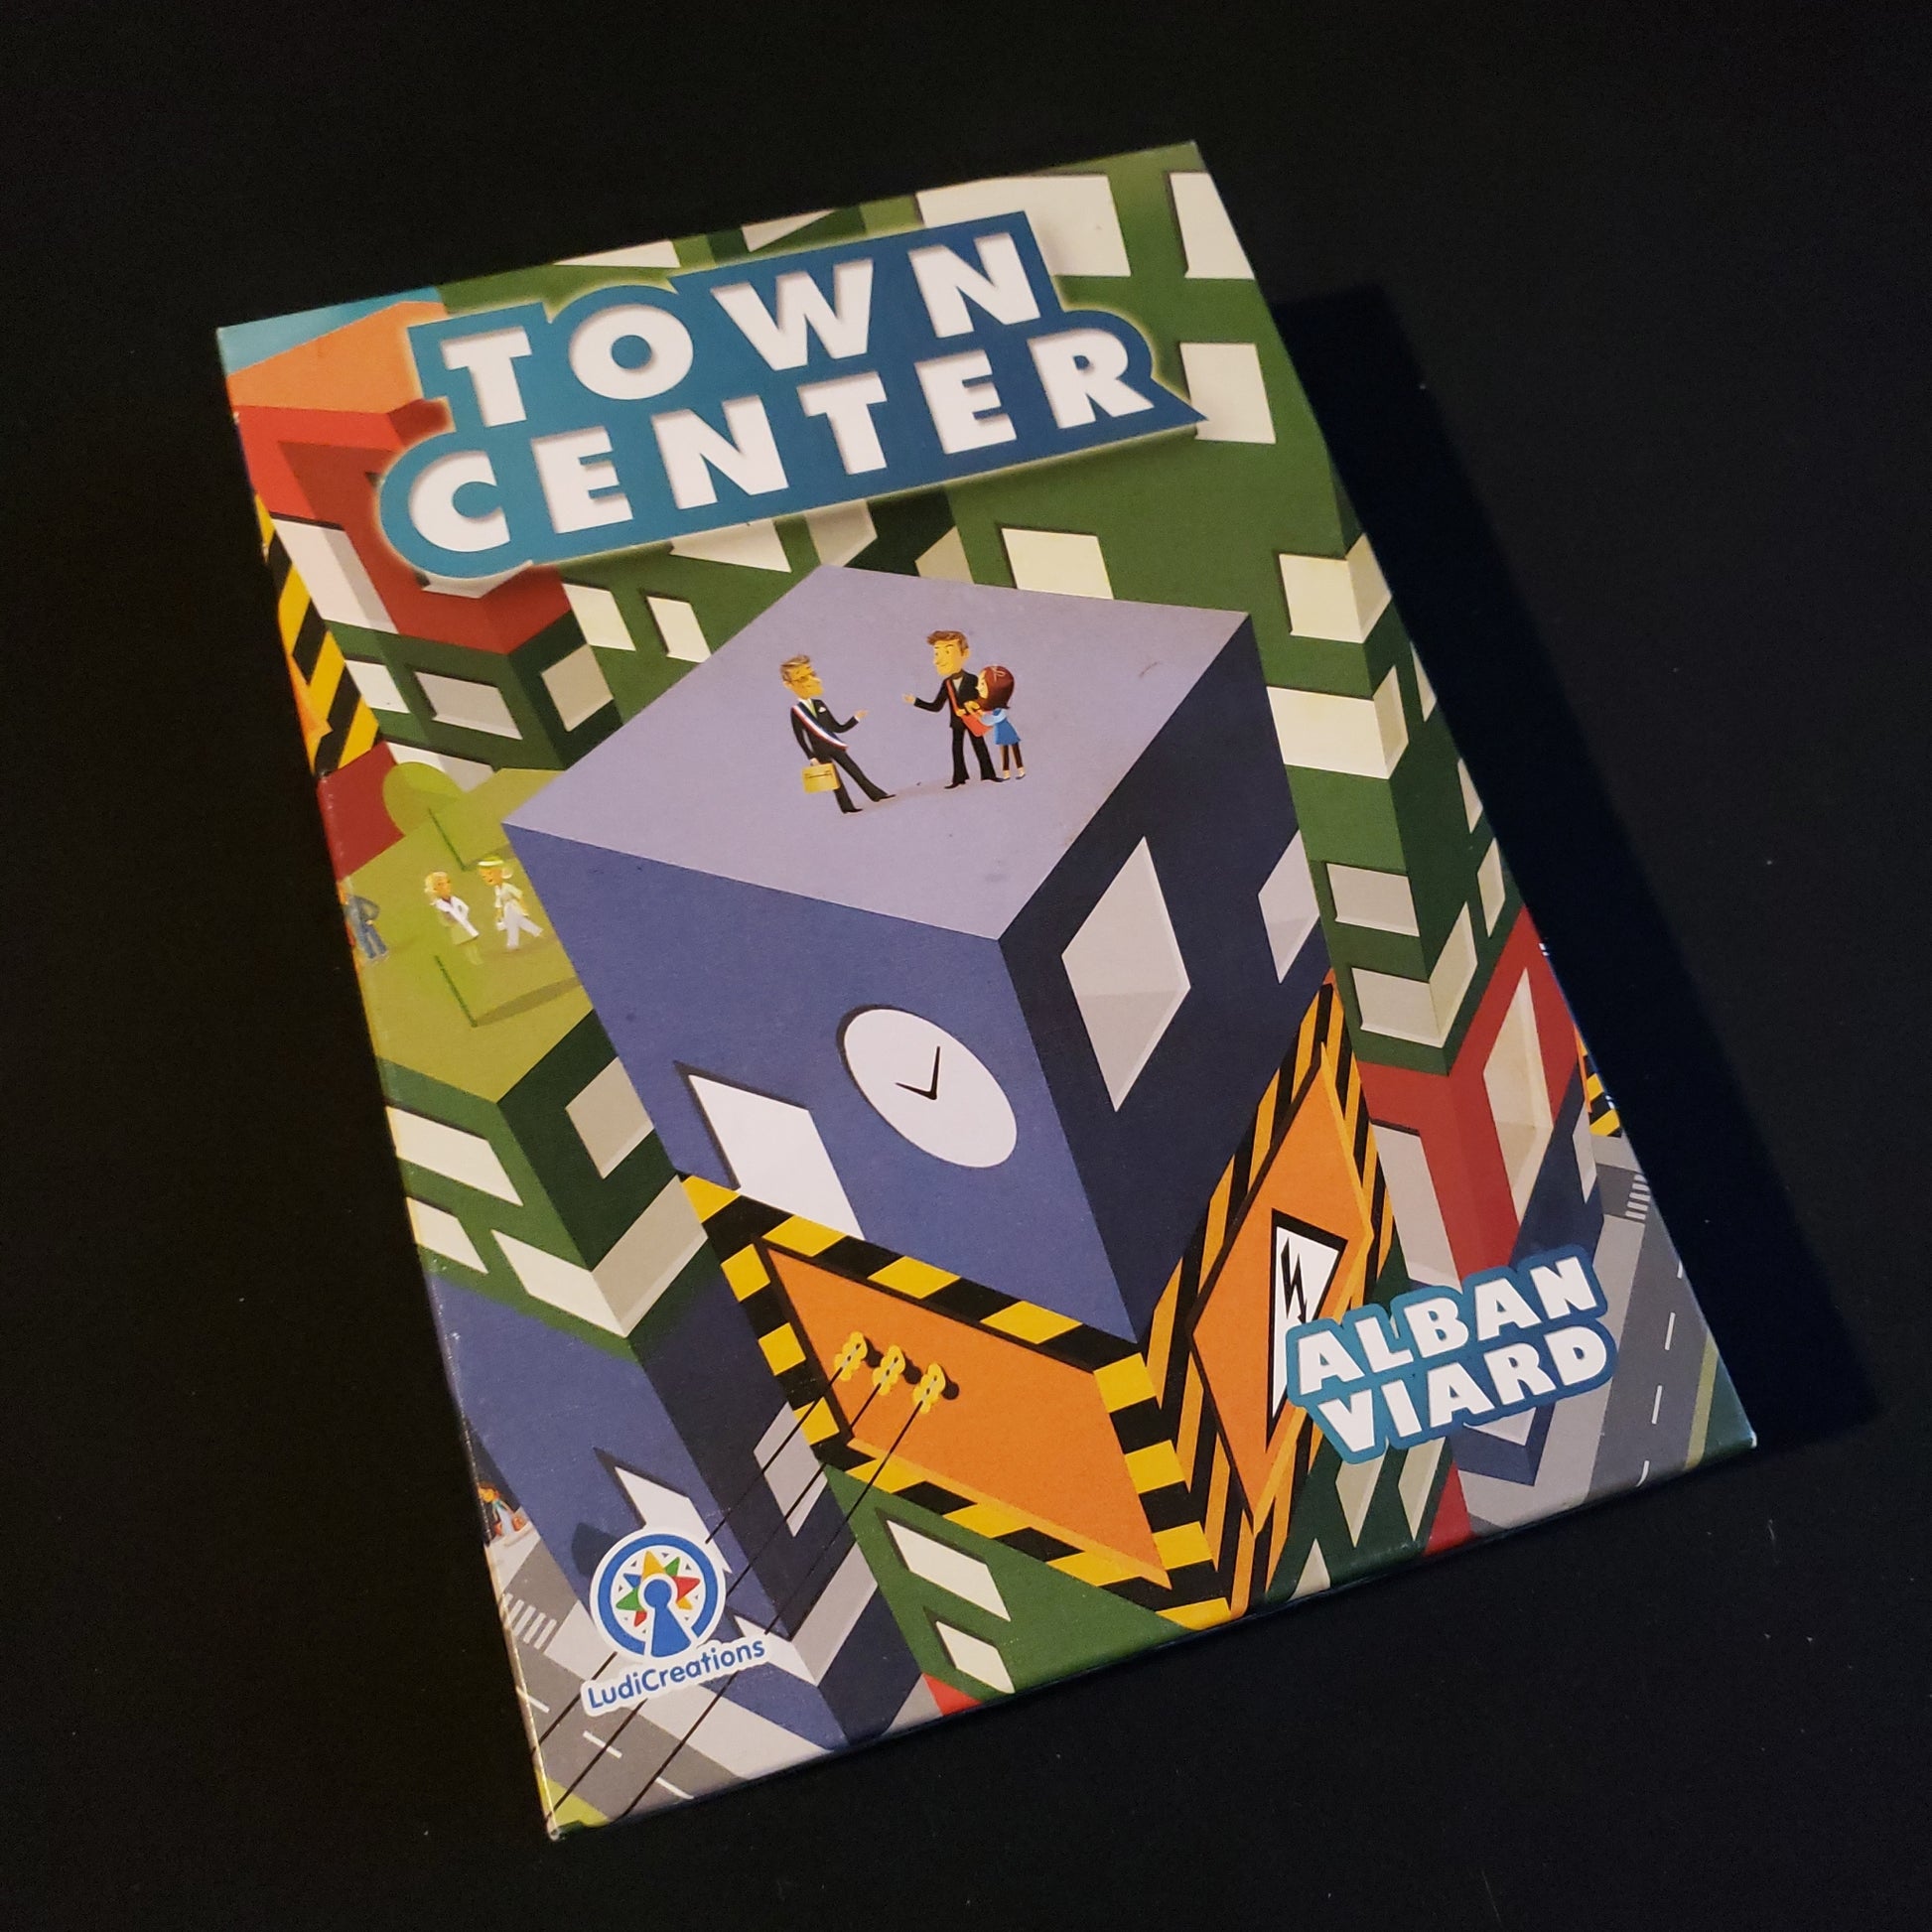 Image shows the front cover of the box of the Town Center board game